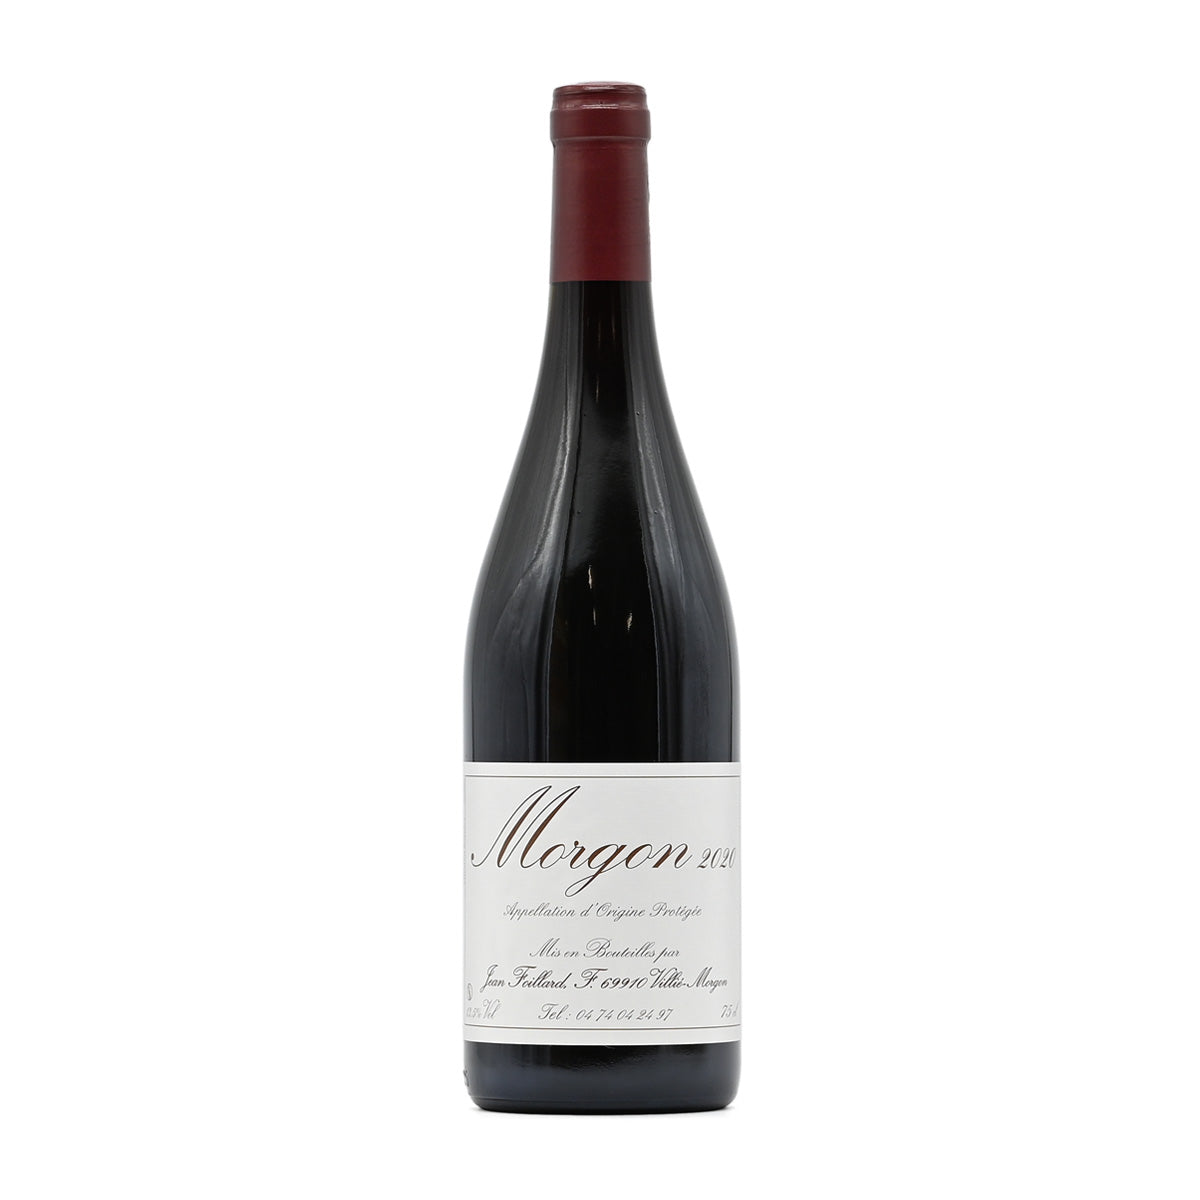 Morgon Classique 2020, 750ml French red wine, made from Gamay, from Domaine Jean Foillard, Morgon, Beaujolais, France – GDV Fine Wines, Hong Kong